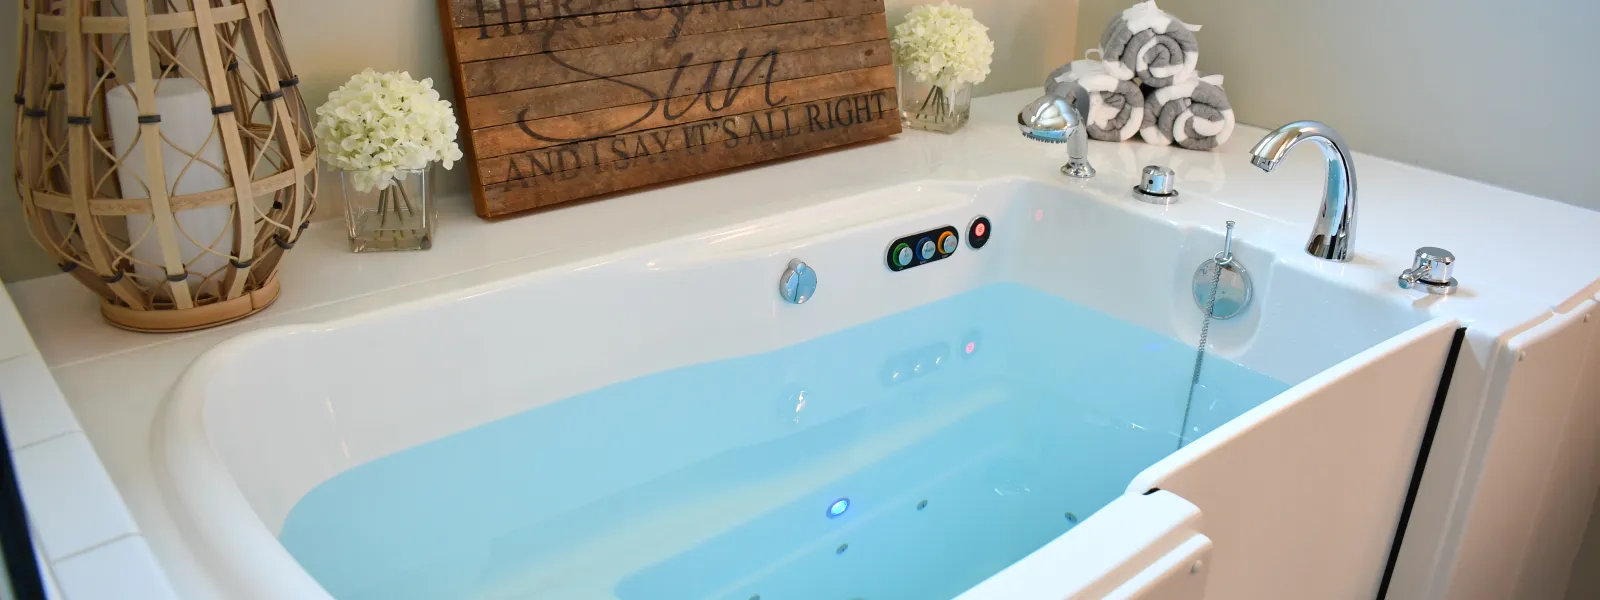 Why Switch to a Walk-in Tub